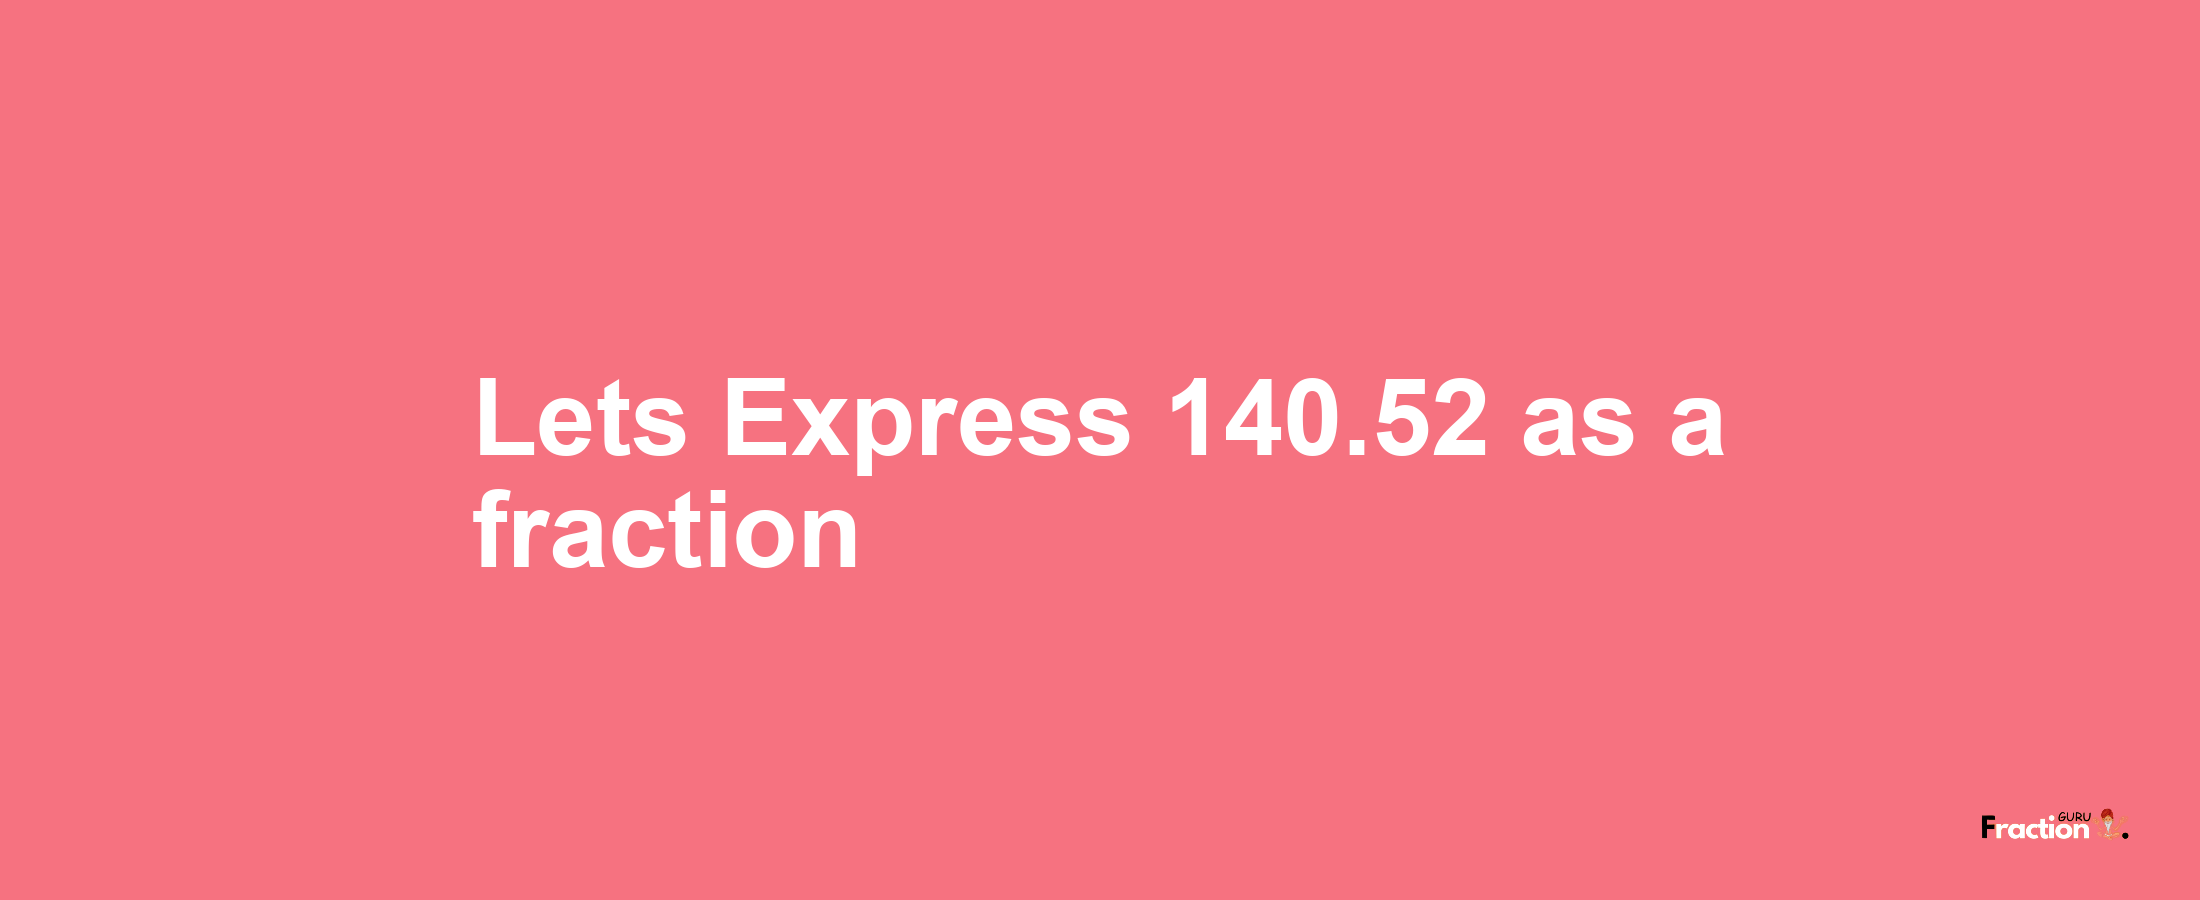 Lets Express 140.52 as afraction